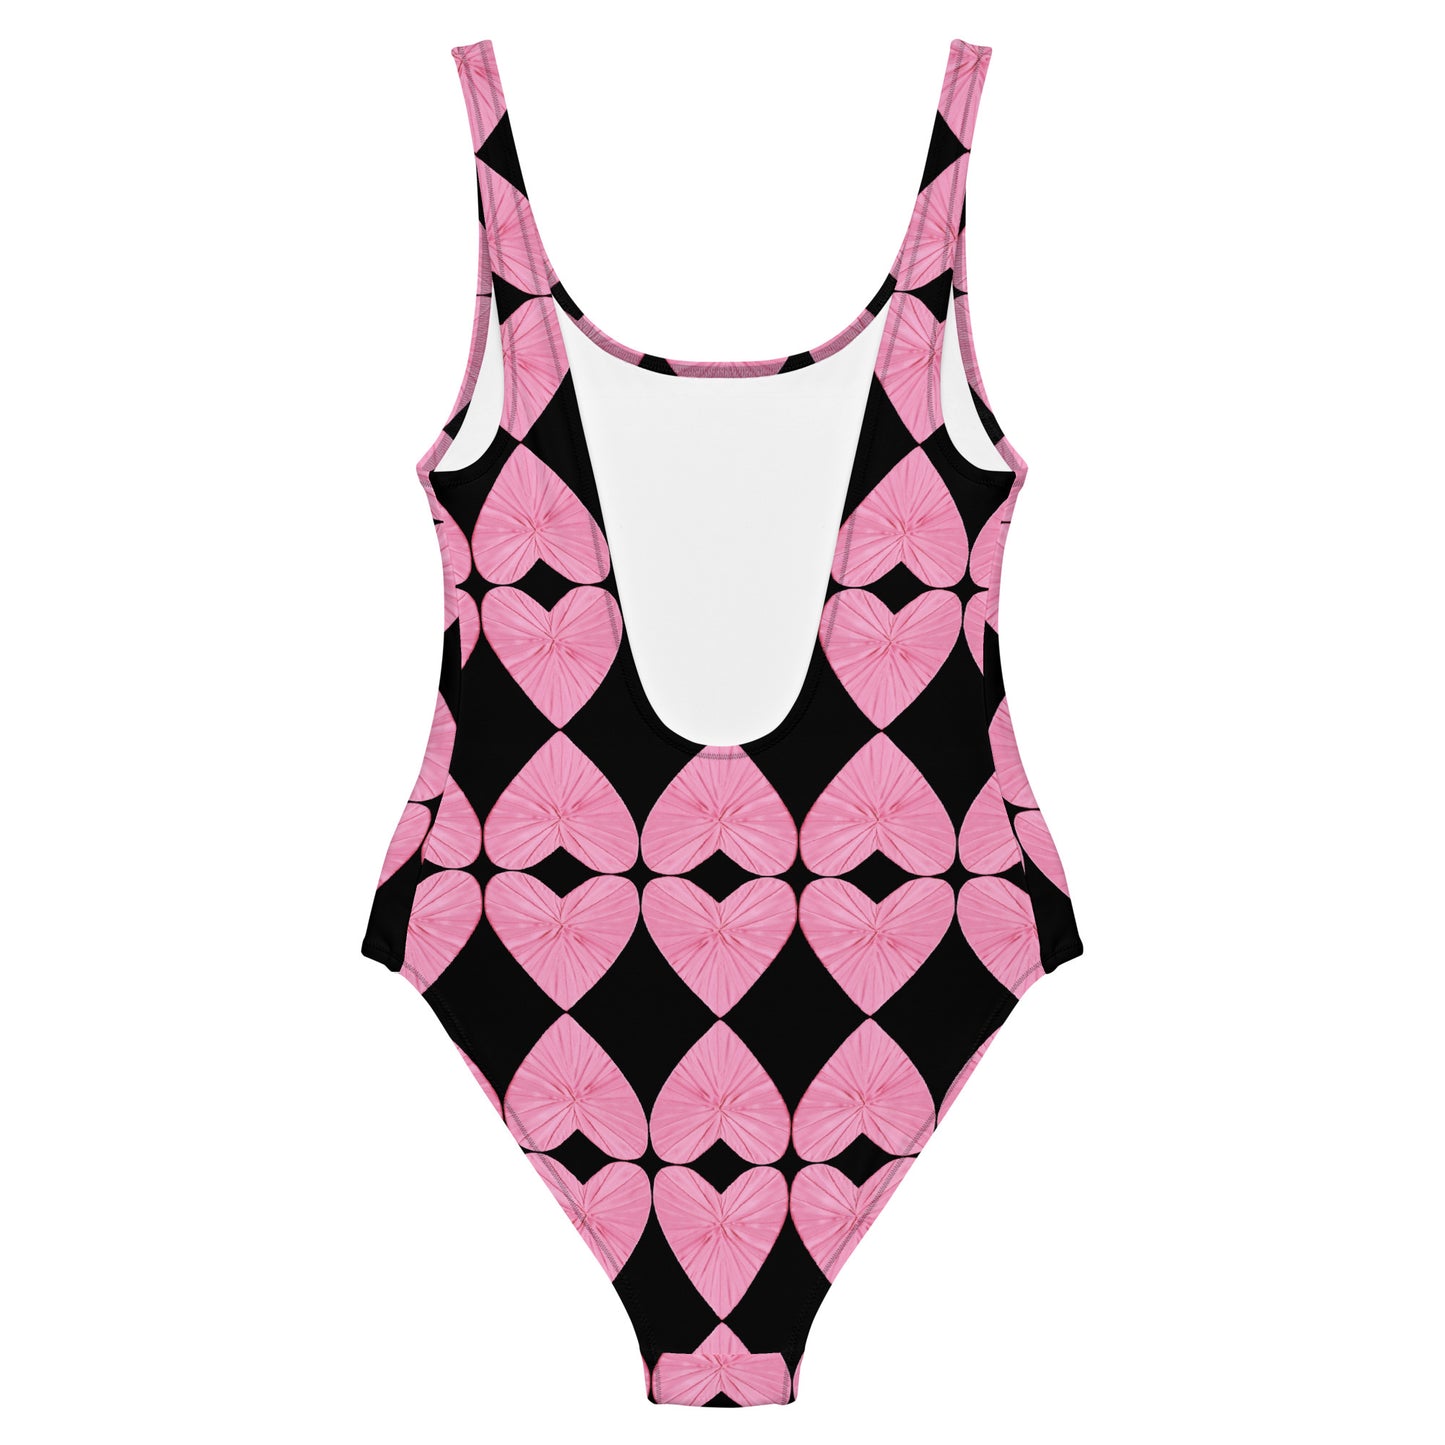 Harlequin Hearts Pink and Black One Piece Swimsuit